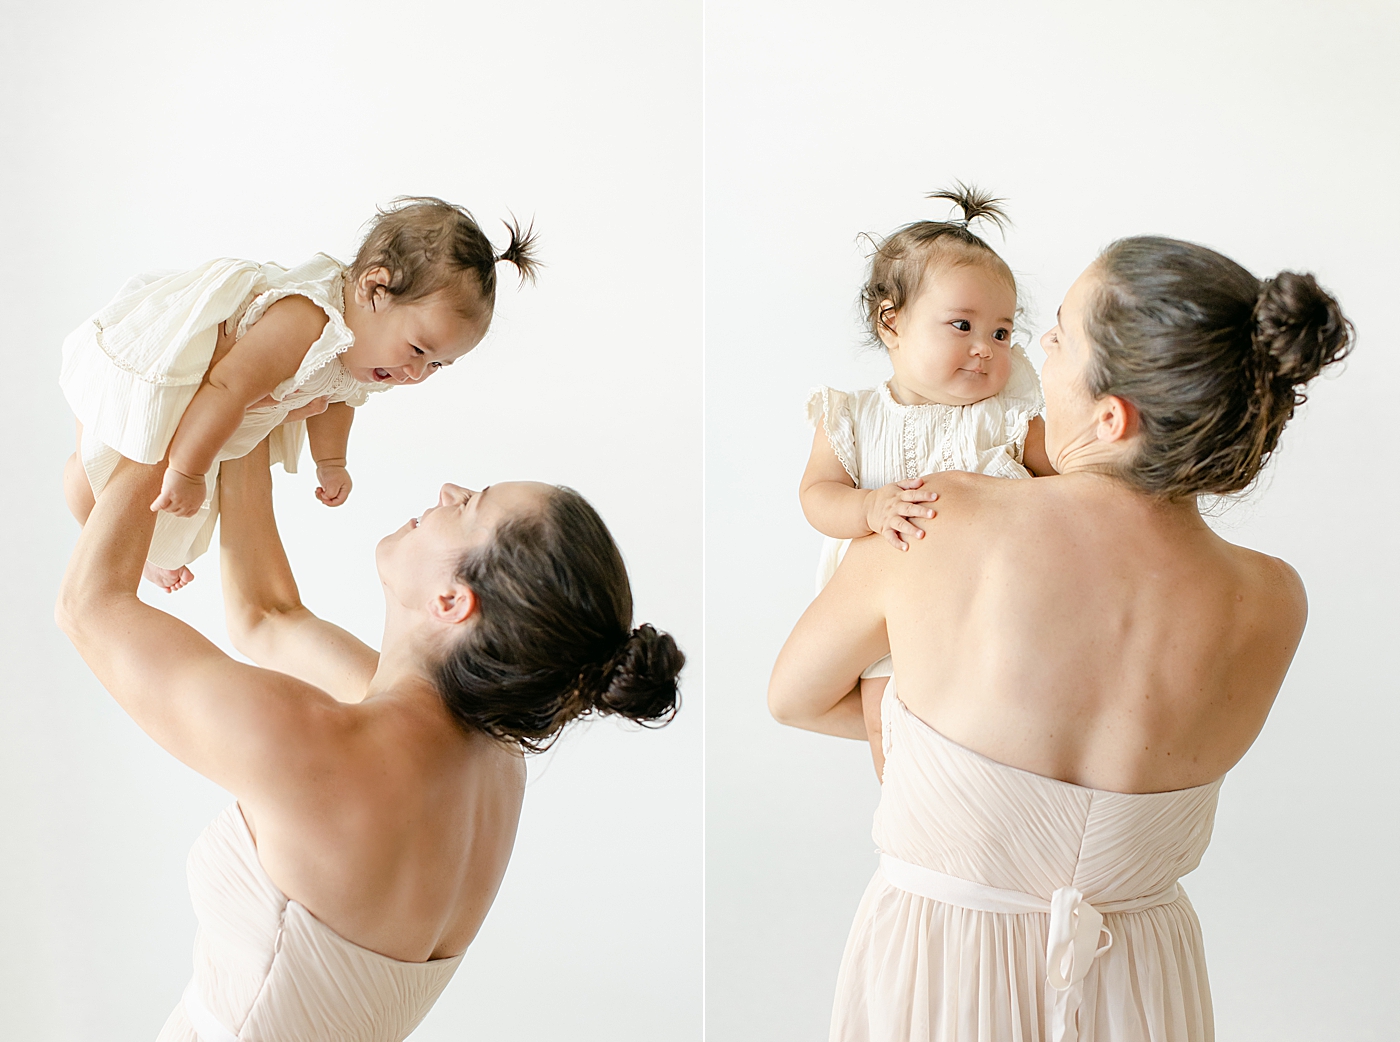 Mom interacting with her baby girl | Image by Chrissy Winchester Photography